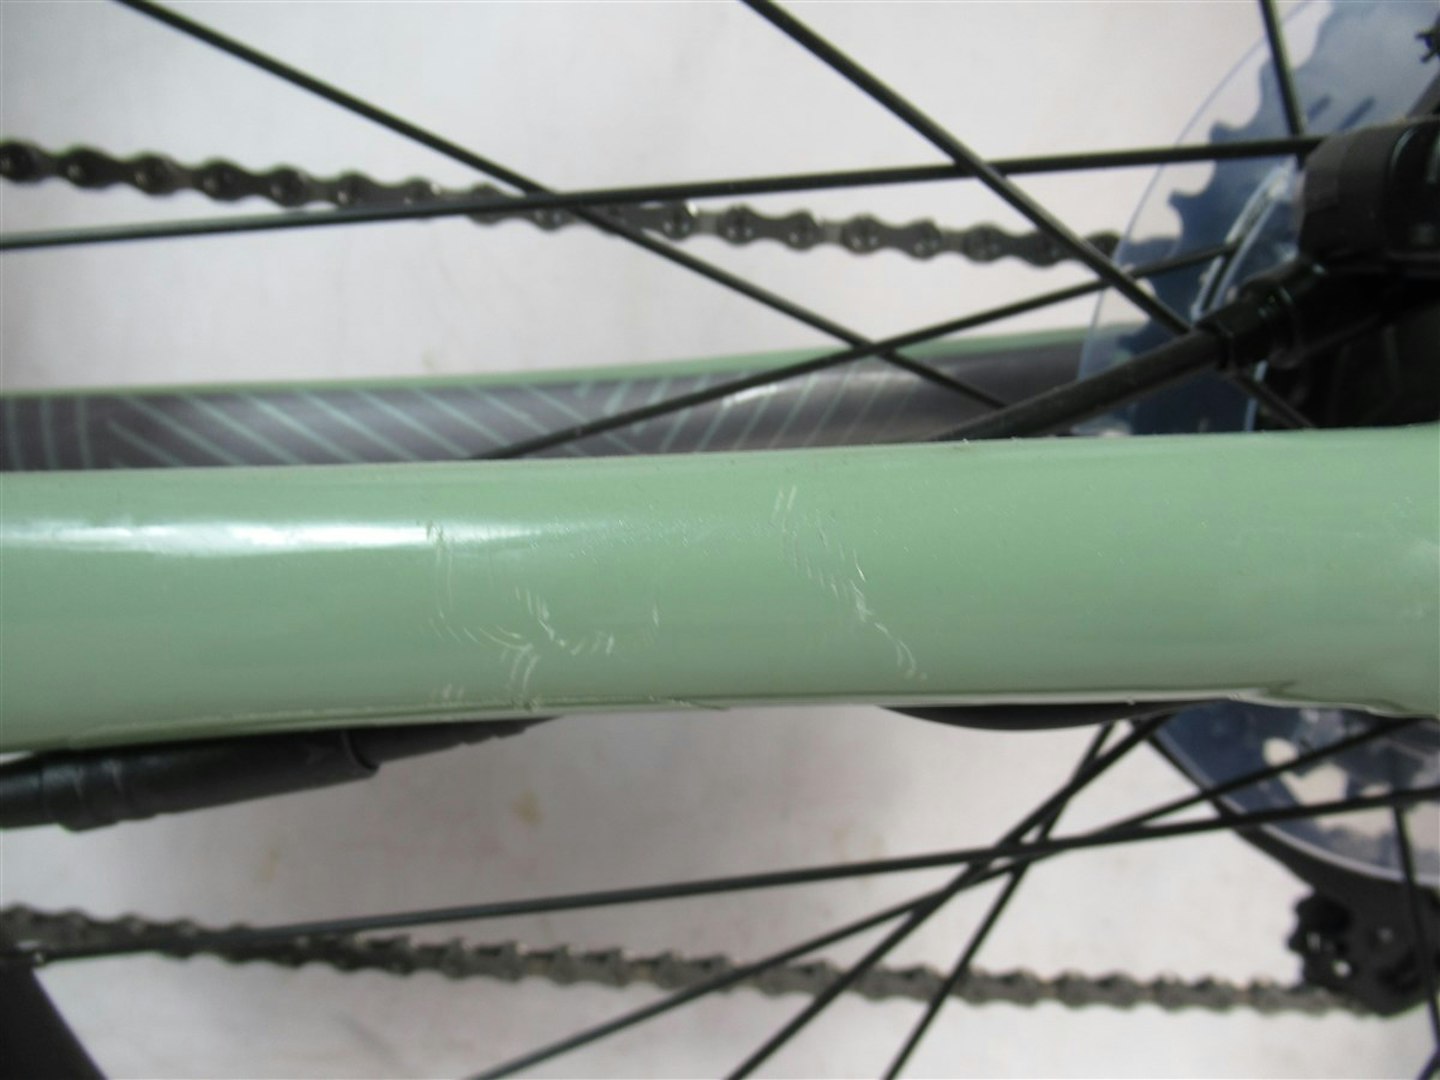 Cannondale Topstone Neo SL 1  chainstay damage